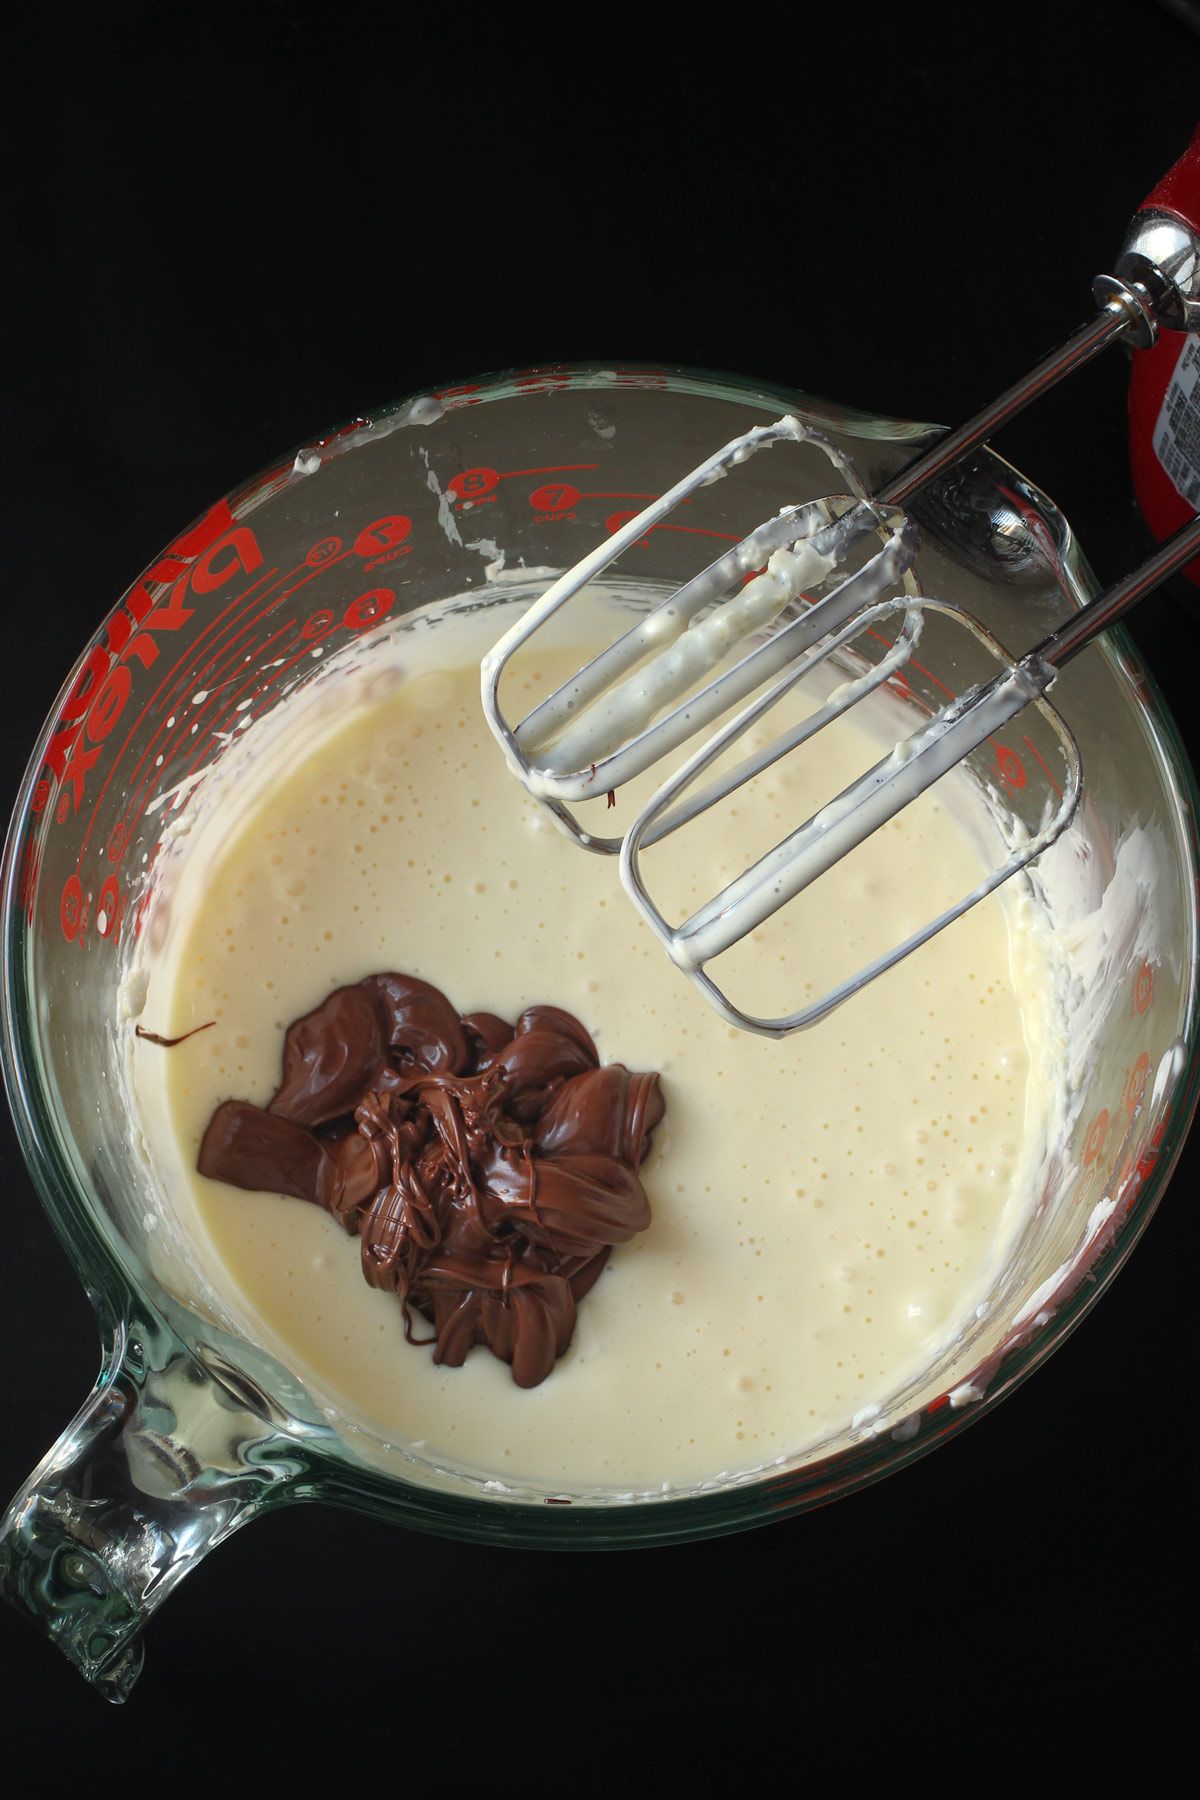 mixing in the melted chocolate into cream cheese mixture.